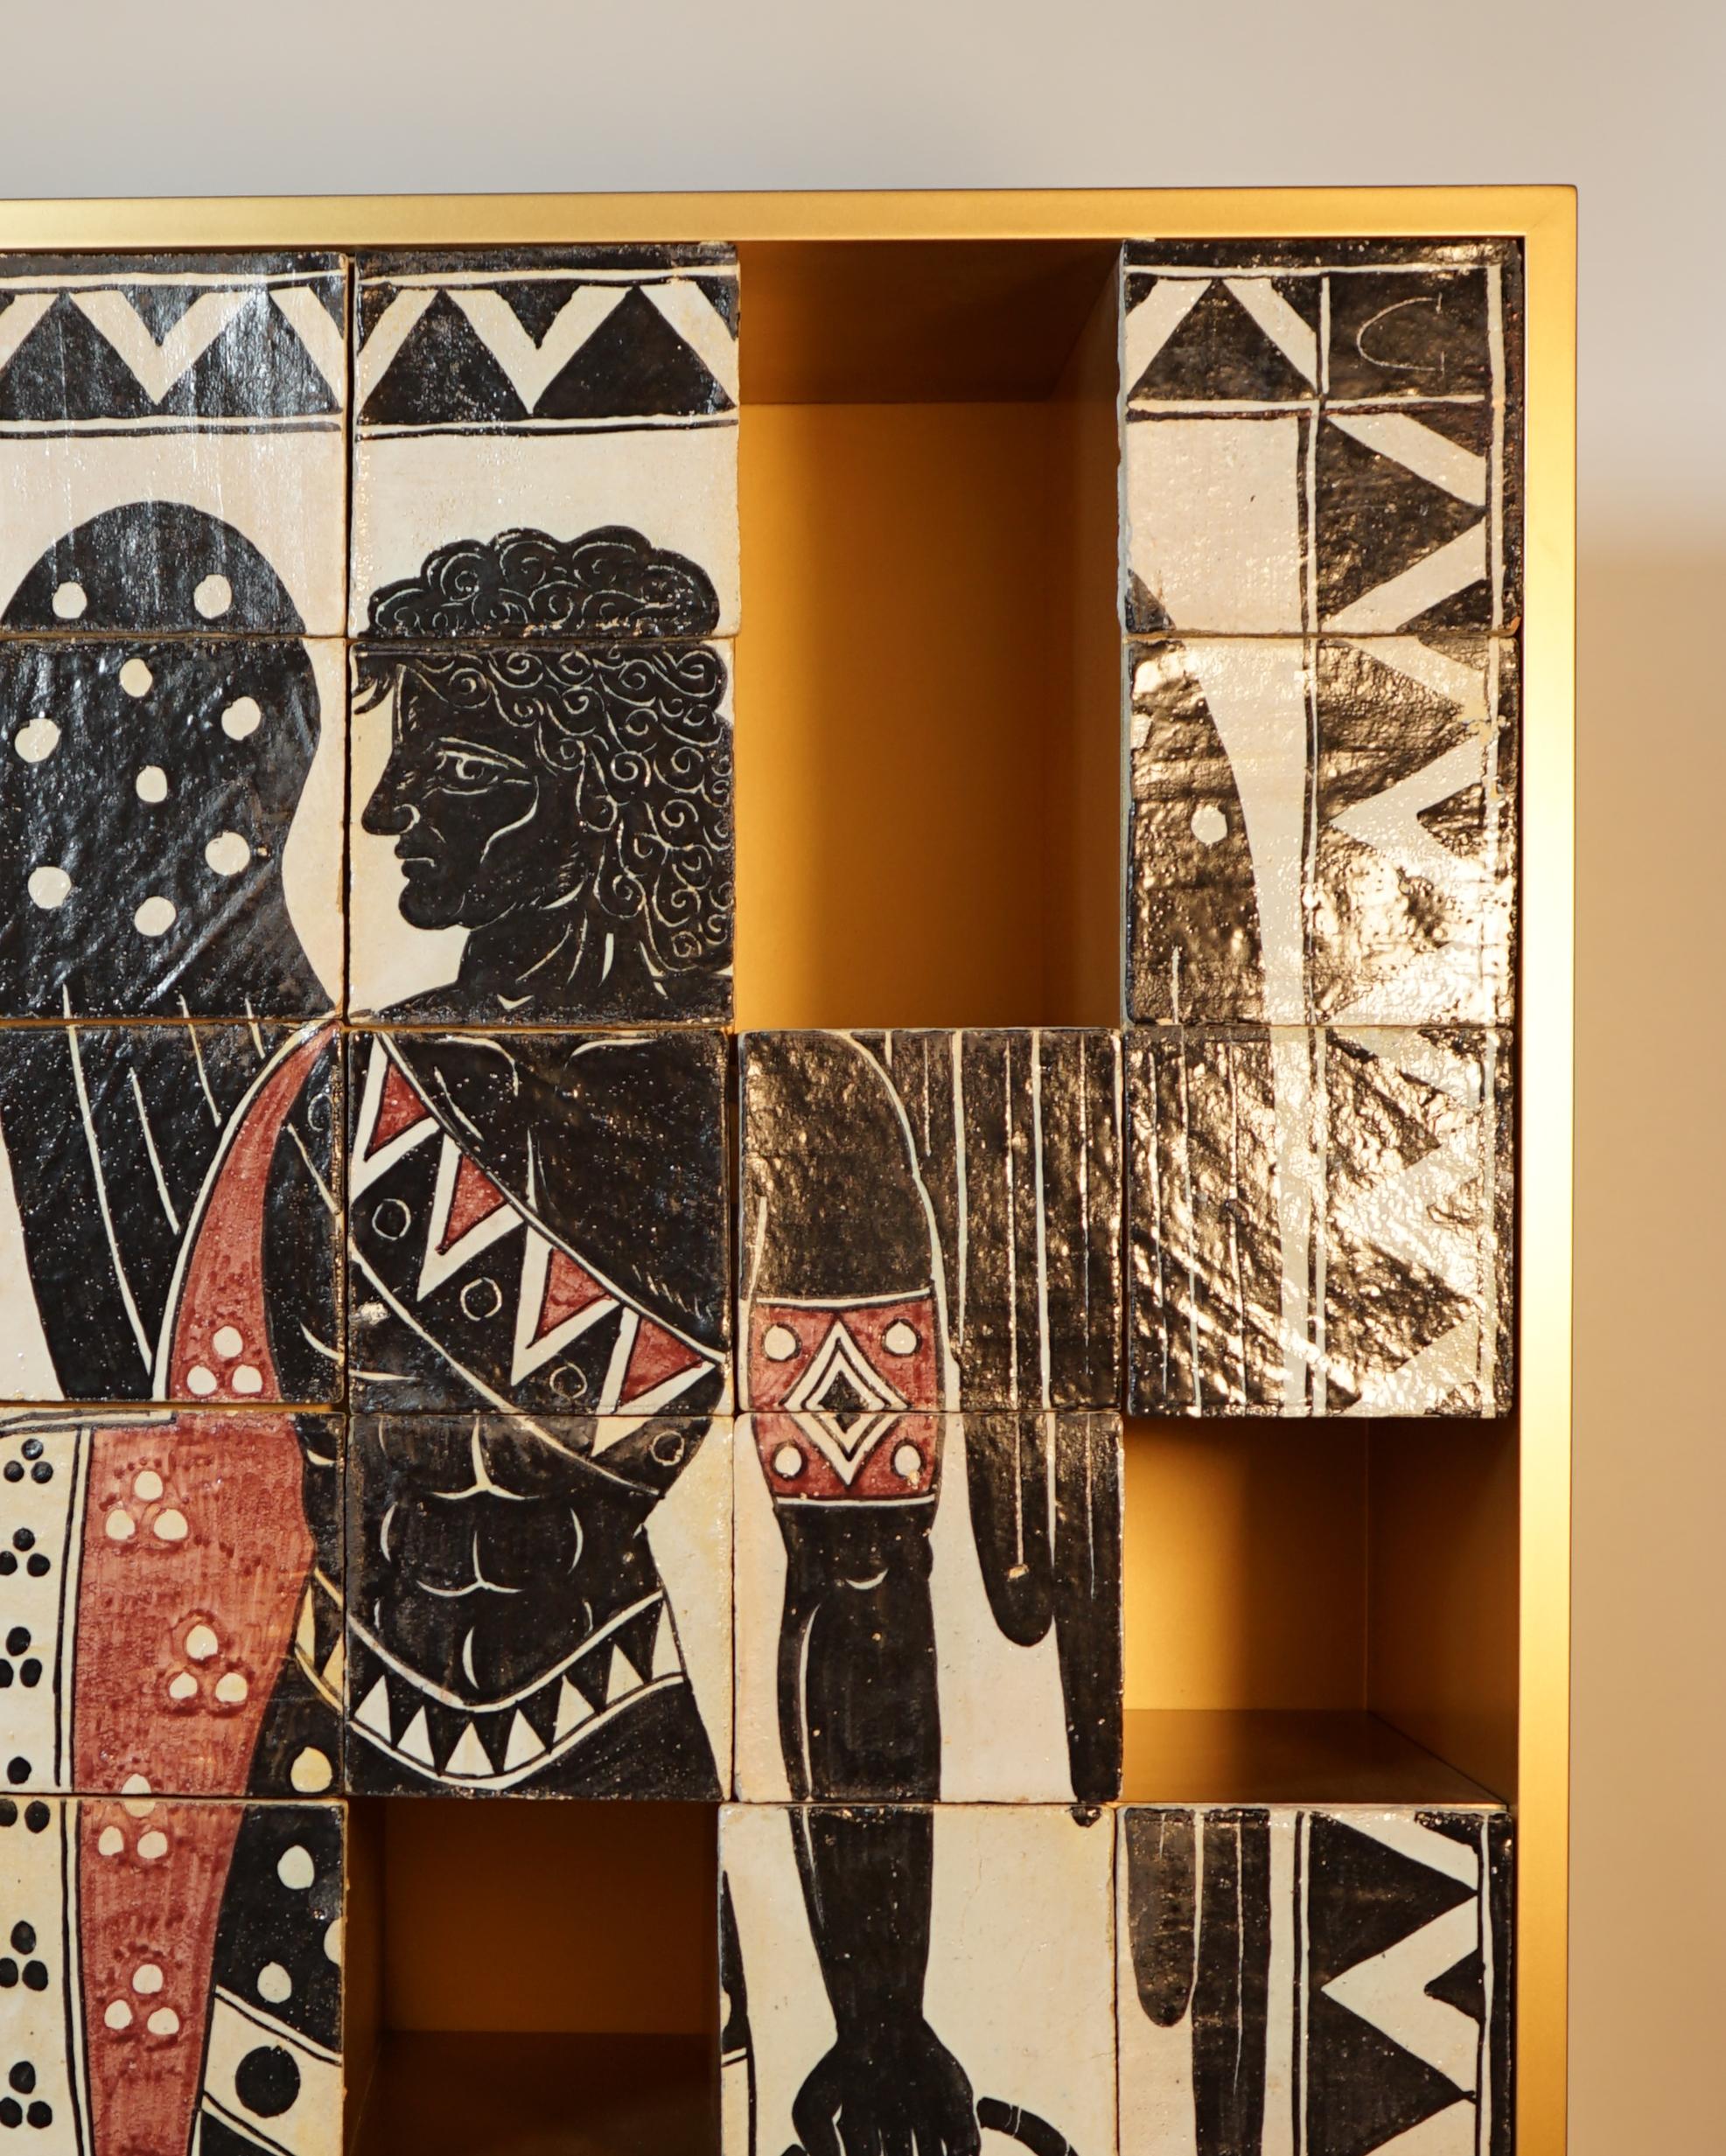 Mythos Apollo container cabinet with wooden structure lacquered in gold color. Hand-decorated on terracotta tiles and with 10 legs in gold-colored lacquered metal. Single piece. Designed by Studio Superego for Superego Editions.

Biography
Superego